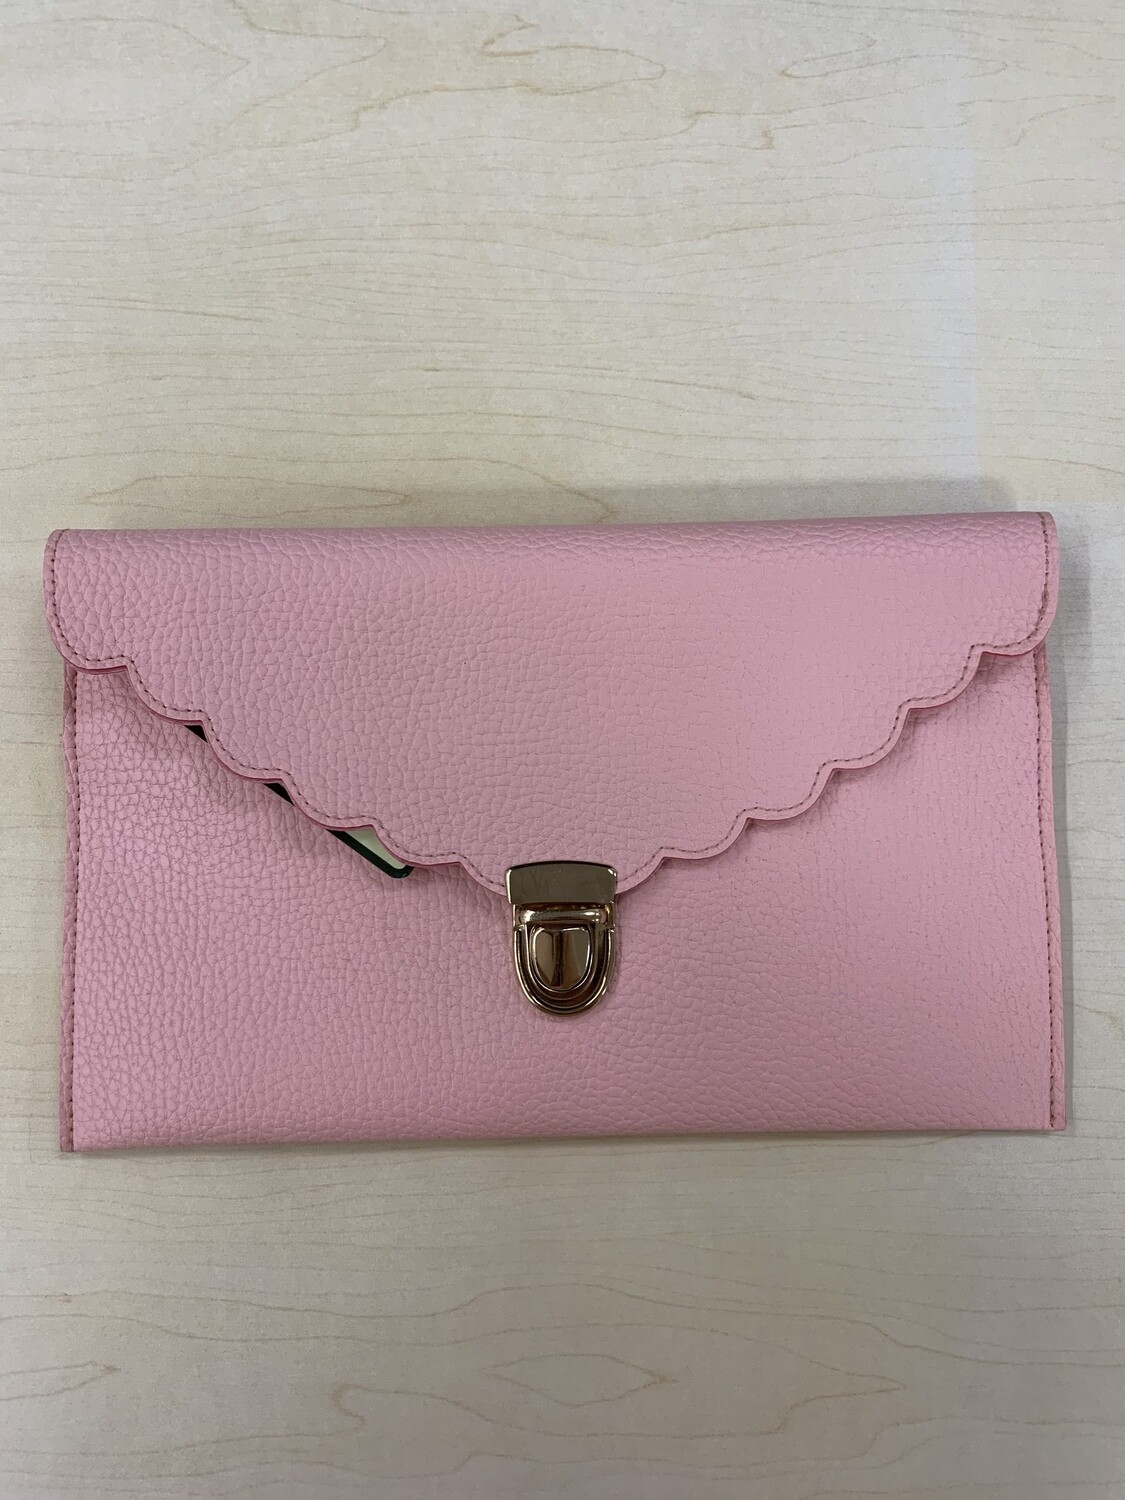 Scalloped Clutch Pink